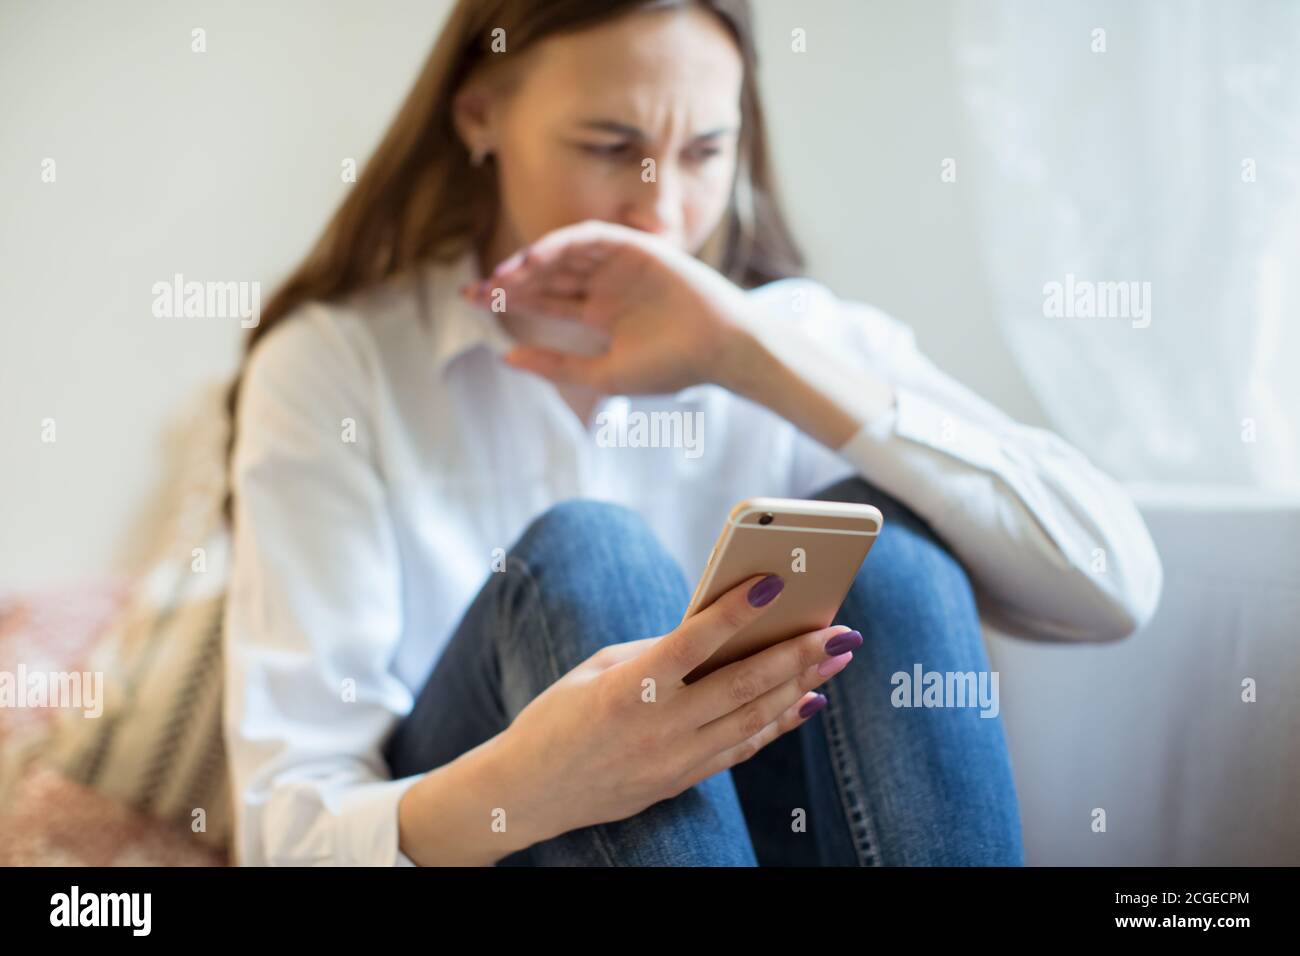 Crying young woman in depression looking at phone gets bad news, covering mouth with hand. Concerned sad girl receiving bad message. Negative emotions Stock Photo